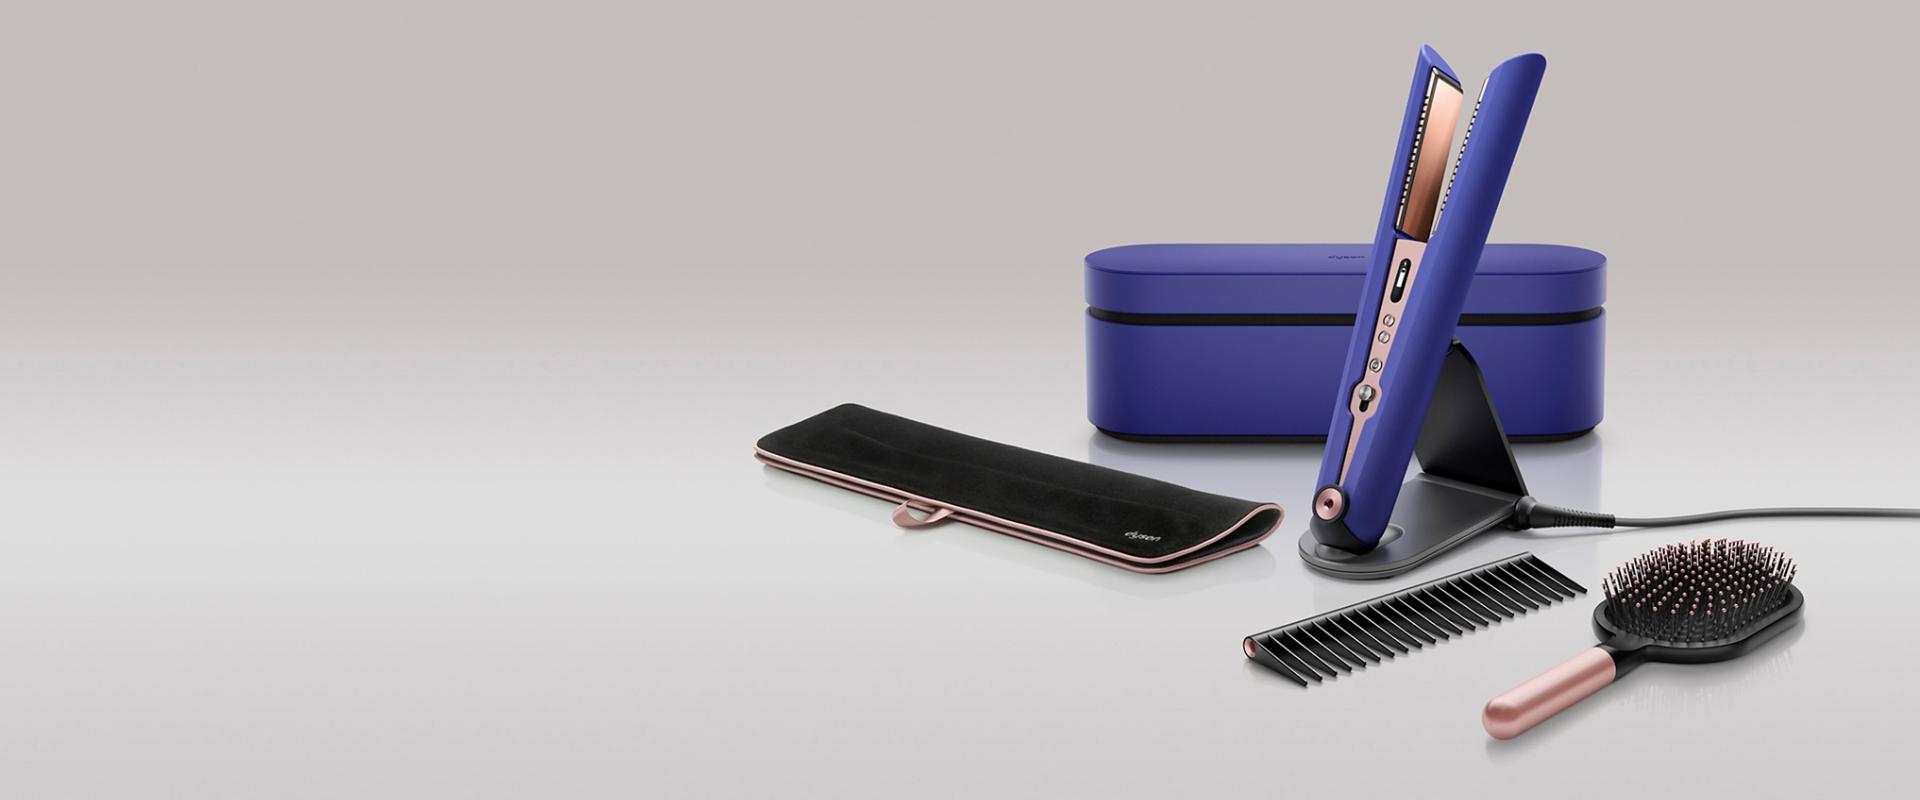 Special edition Dyson Corrale hair straightener with presentation case and travel pouch